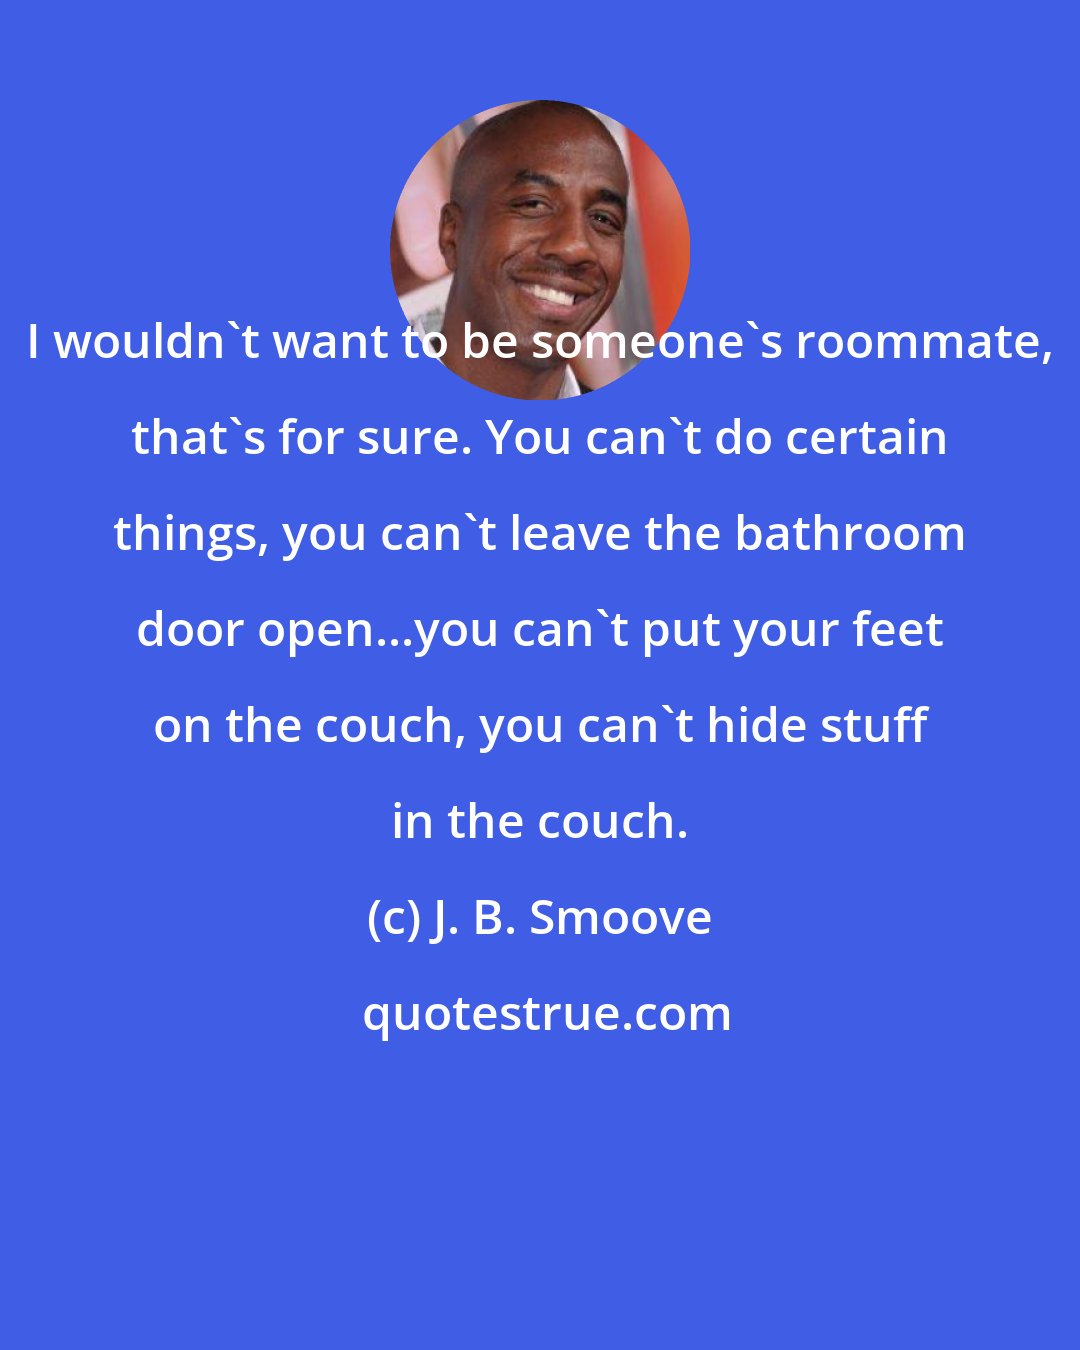 J. B. Smoove: I wouldn't want to be someone's roommate, that's for sure. You can't do certain things, you can't leave the bathroom door open...you can't put your feet on the couch, you can't hide stuff in the couch.